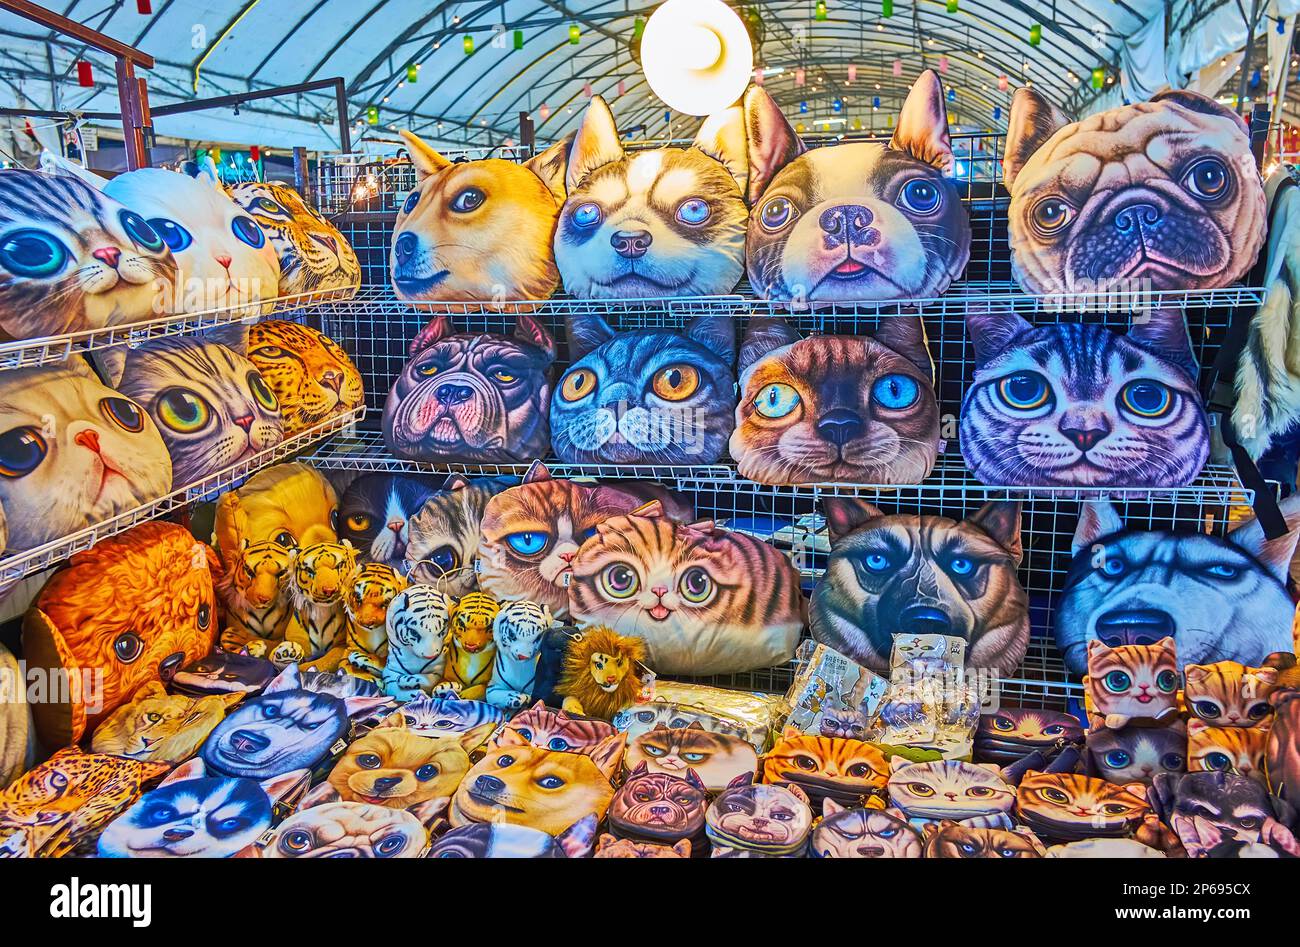 The funny dogs and cats heads pillows and small bags in a stall of Anusarn Night Market, Chiang Mai, Thailand Stock Photo